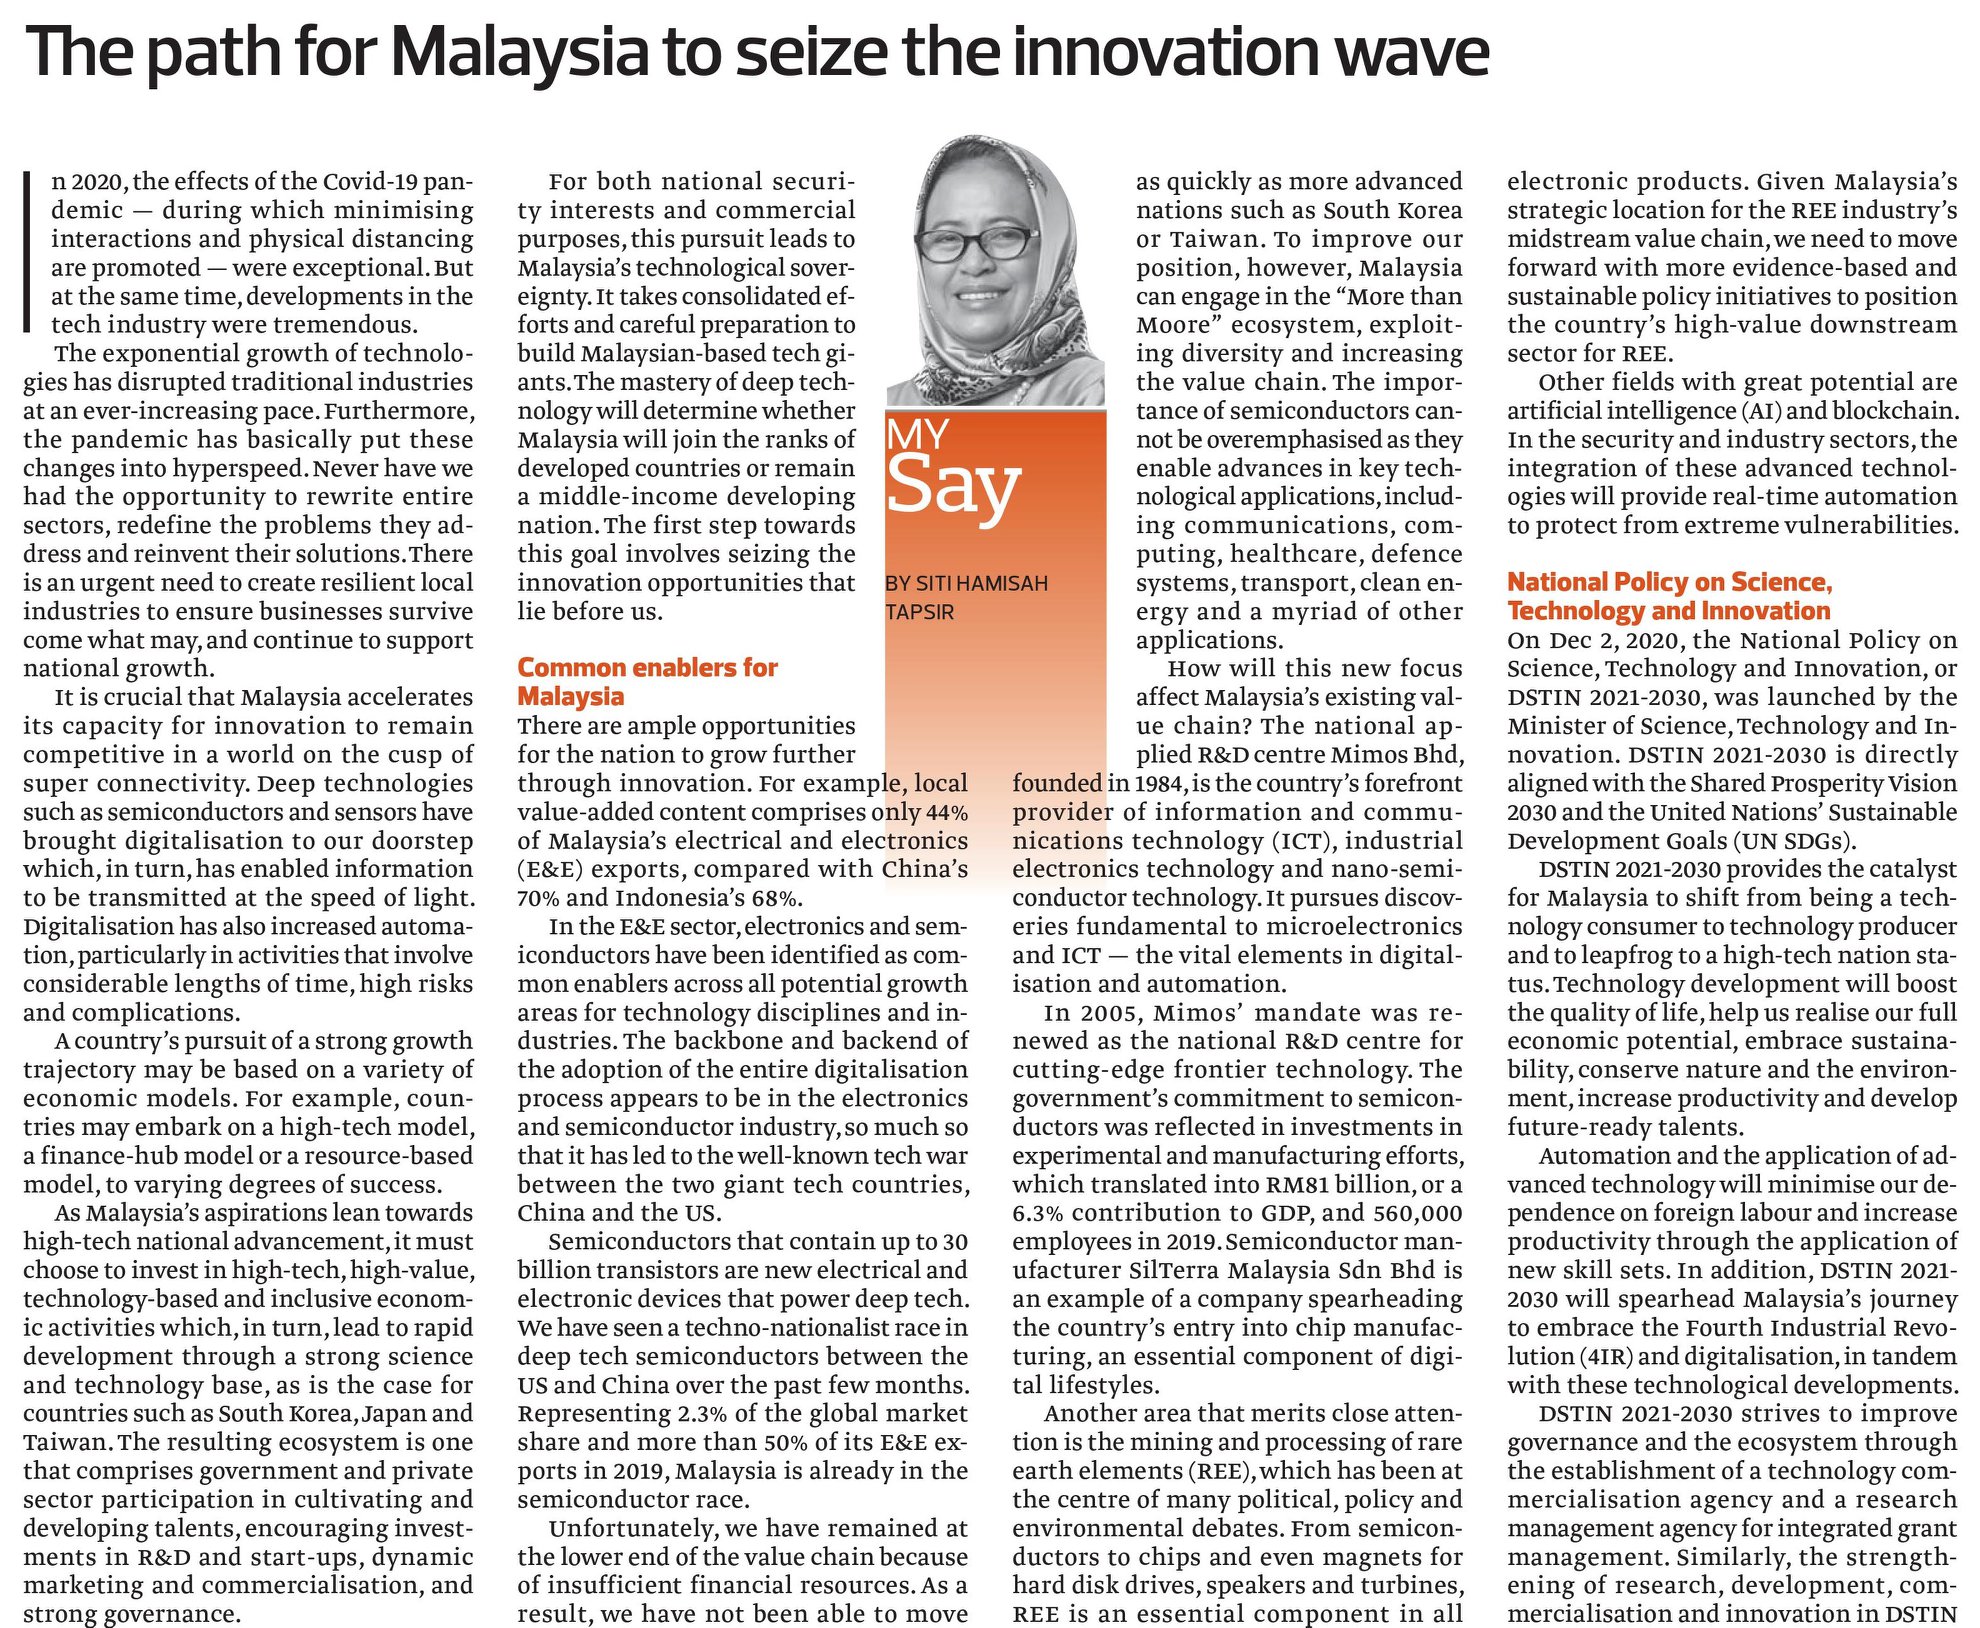 The Path for Malaysia to Seize the Innovation Wave